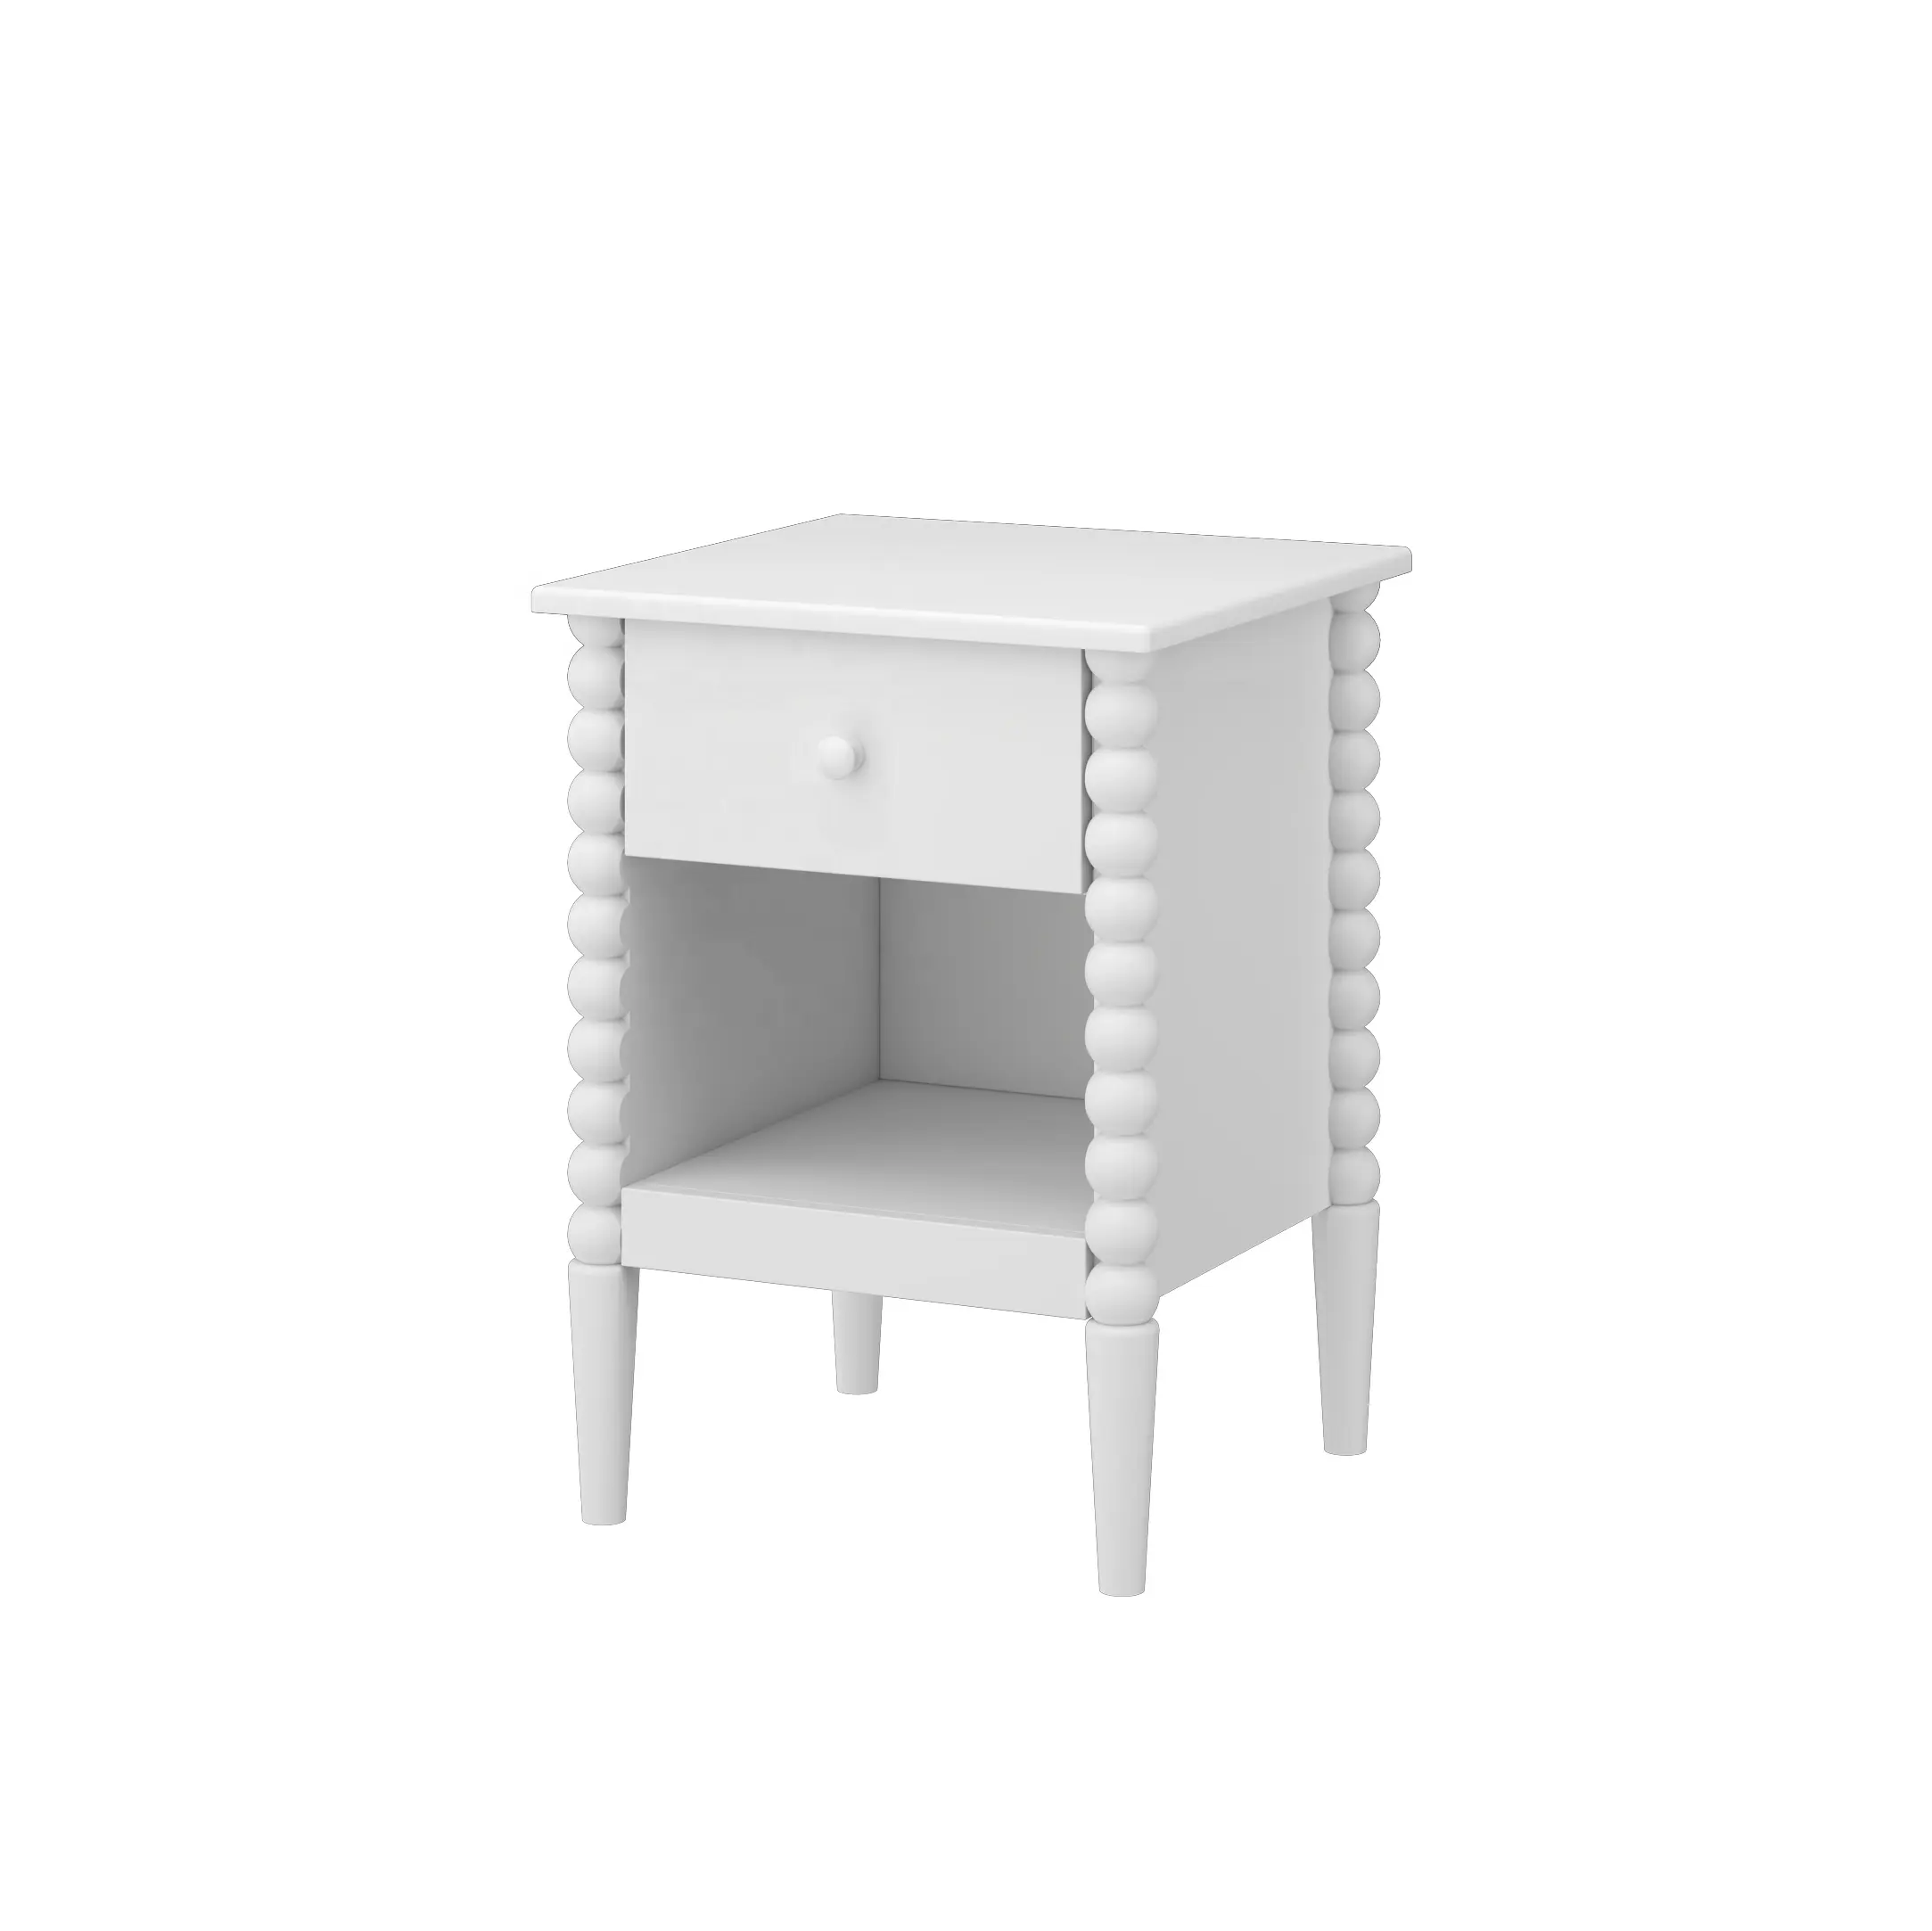 New Stylish Coffee Table White Nightstand with Drawer and 4 Legs Luxury Sofa Bedside Table Home Furniture